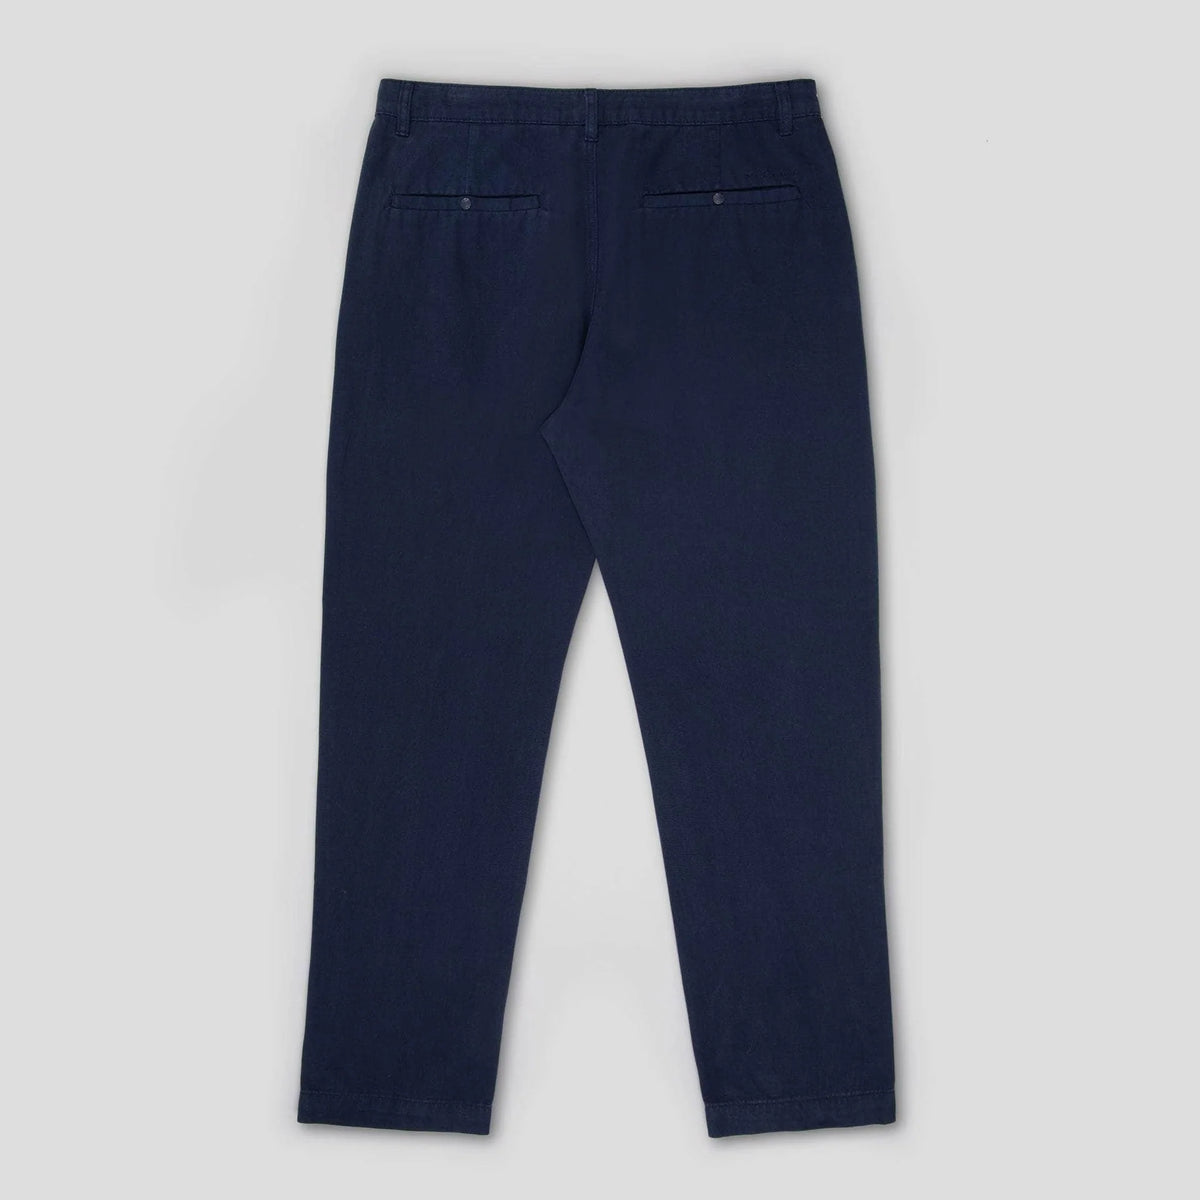 MC Overalls Navy Relaxed Fit Trousers